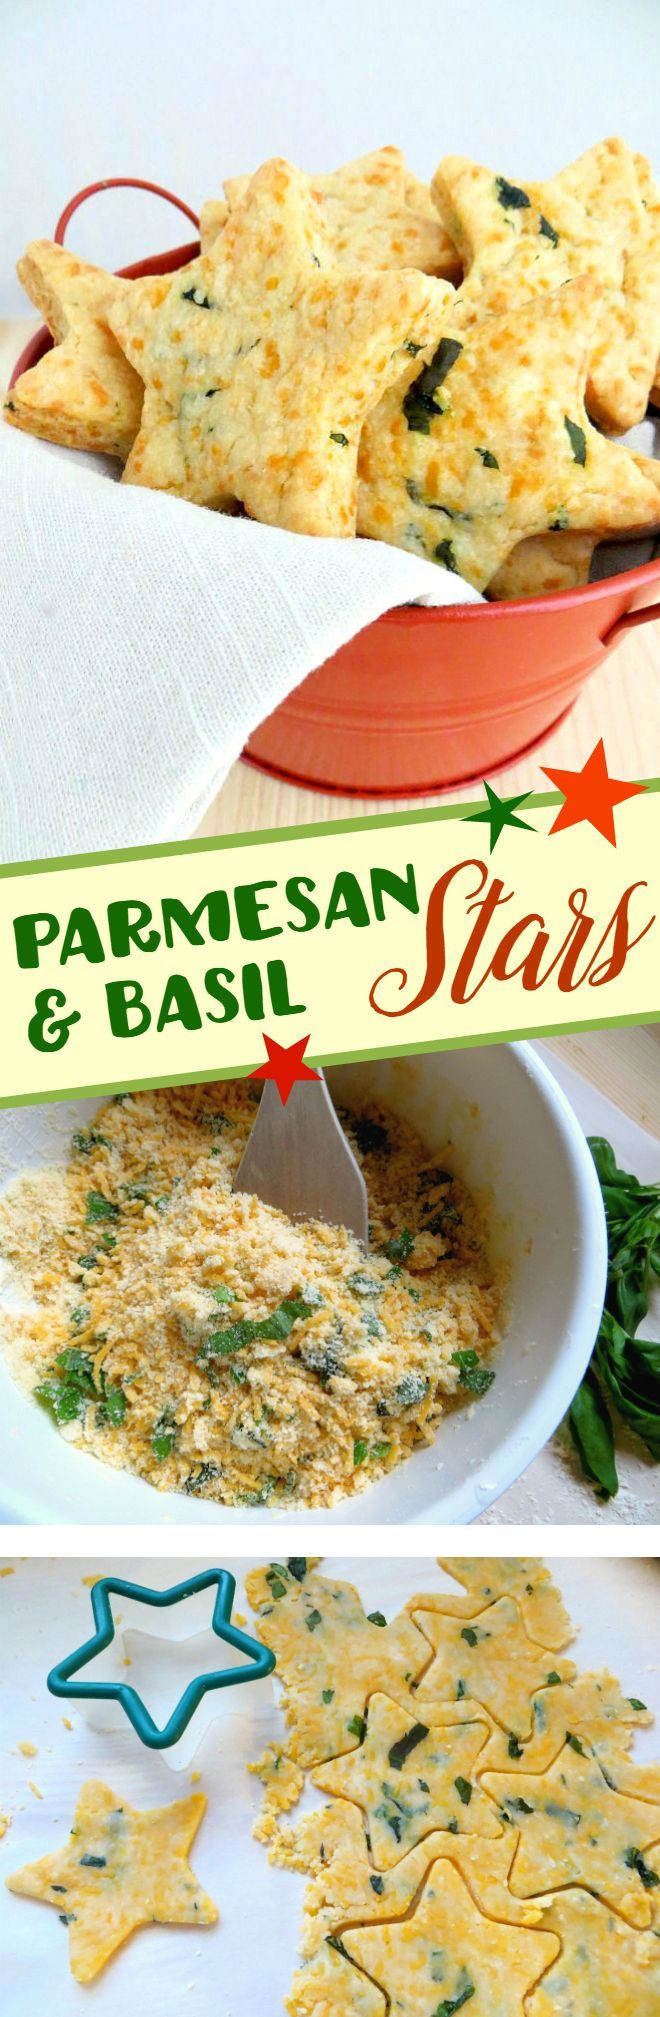 4Th Of July Party Appetizers
 Parmesan & Basil Stars Great appetizer or snack recipe